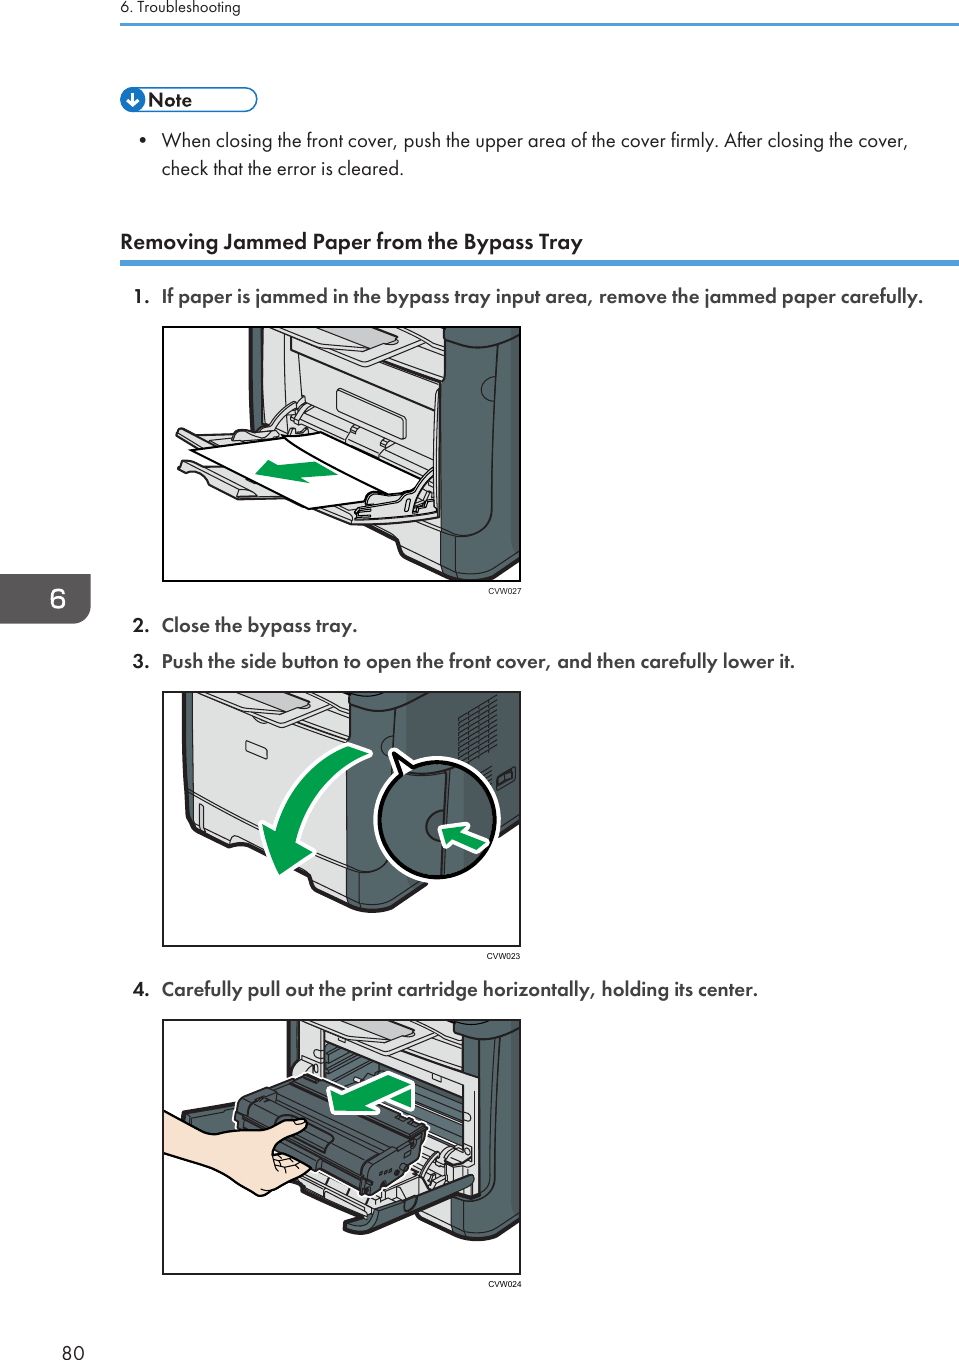 • When closing the front cover, push the upper area of the cover firmly. After closing the cover,check that the error is cleared.Removing Jammed Paper from the Bypass Tray1. If paper is jammed in the bypass tray input area, remove the jammed paper carefully.CVW0272. Close the bypass tray.3. Push the side button to open the front cover, and then carefully lower it.CVW0234. Carefully pull out the print cartridge horizontally, holding its center.CVW0246. Troubleshooting80